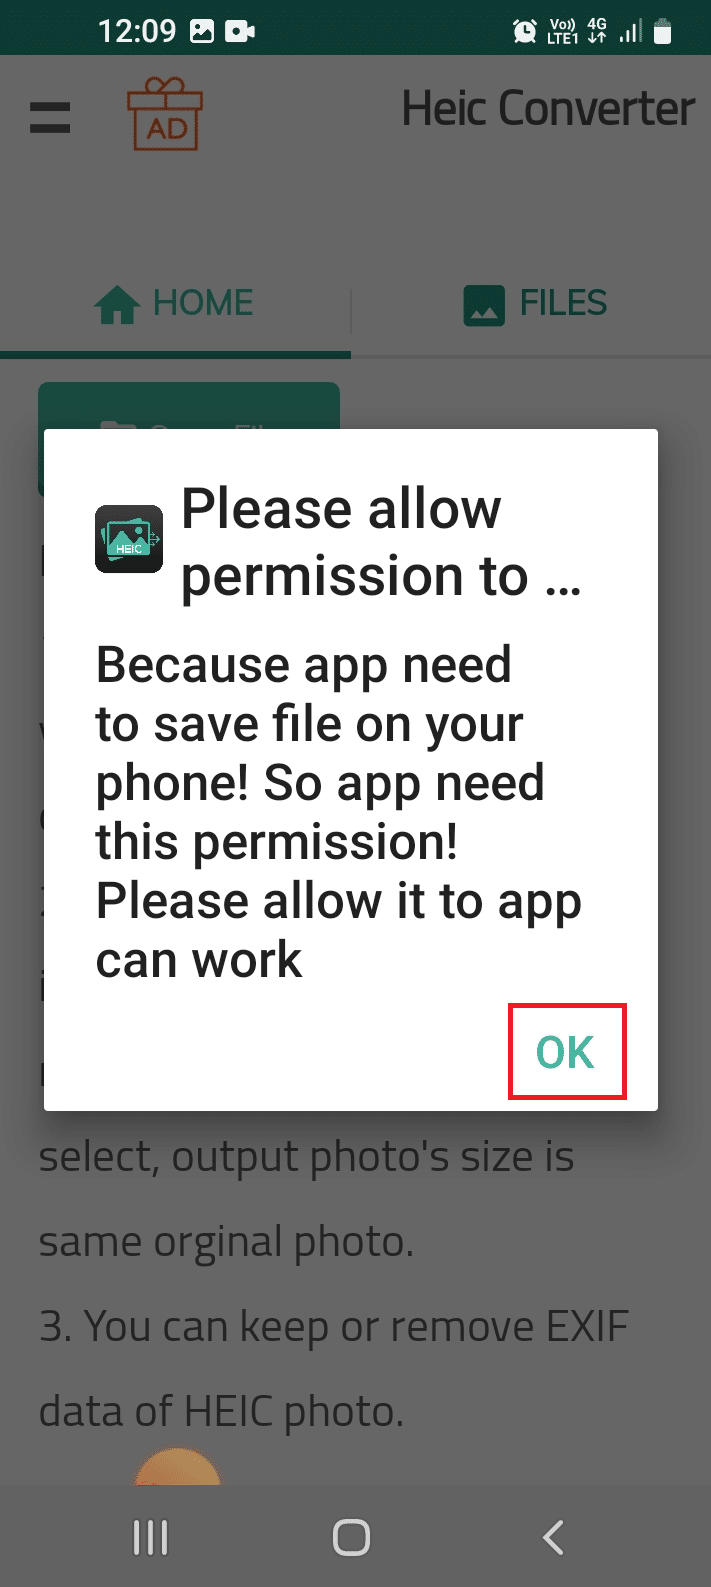 tap on the OK option on the permission page